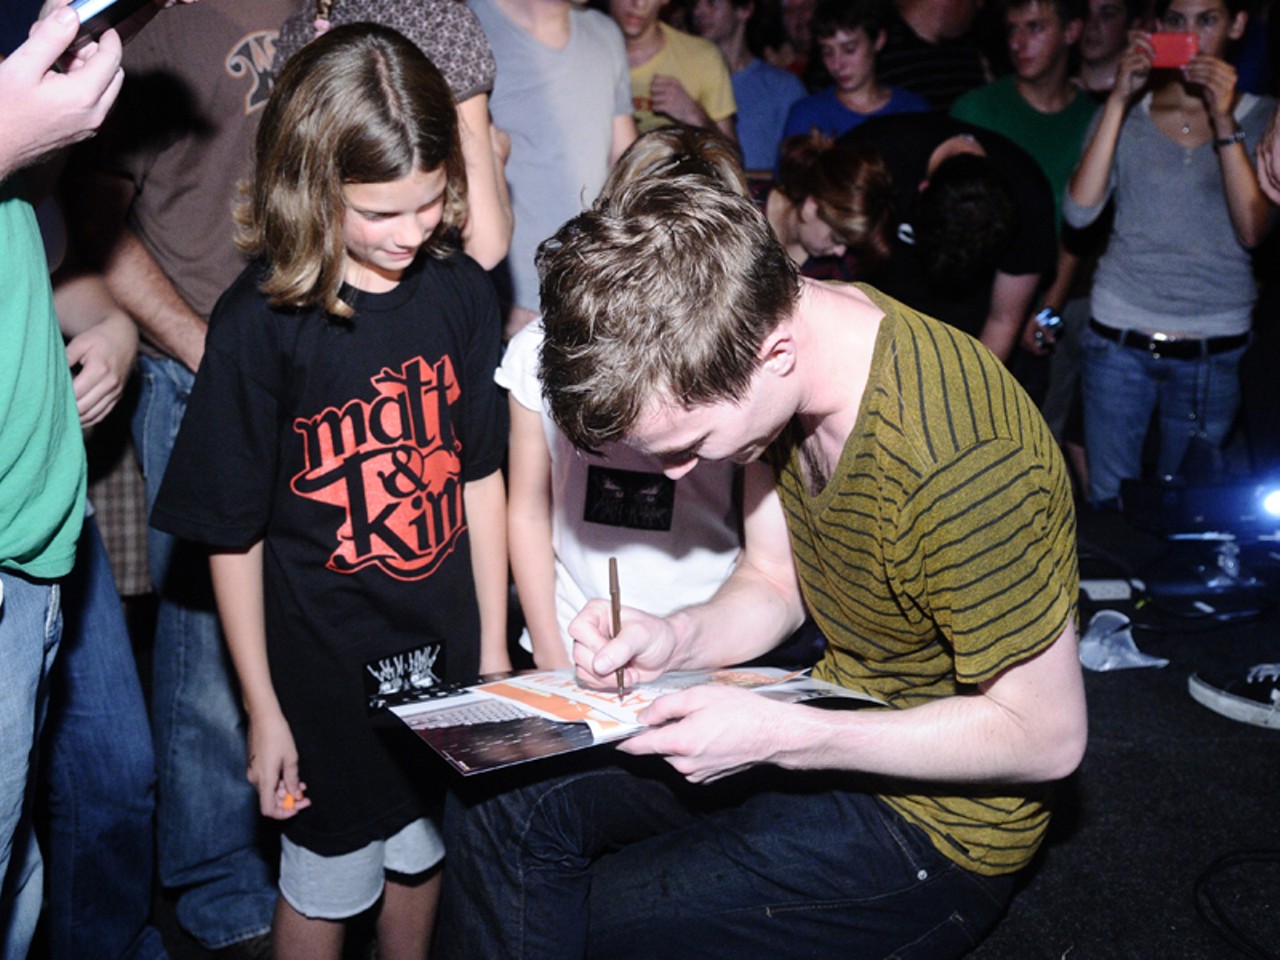 Matt signs an autograph for a young fan at the show's end.